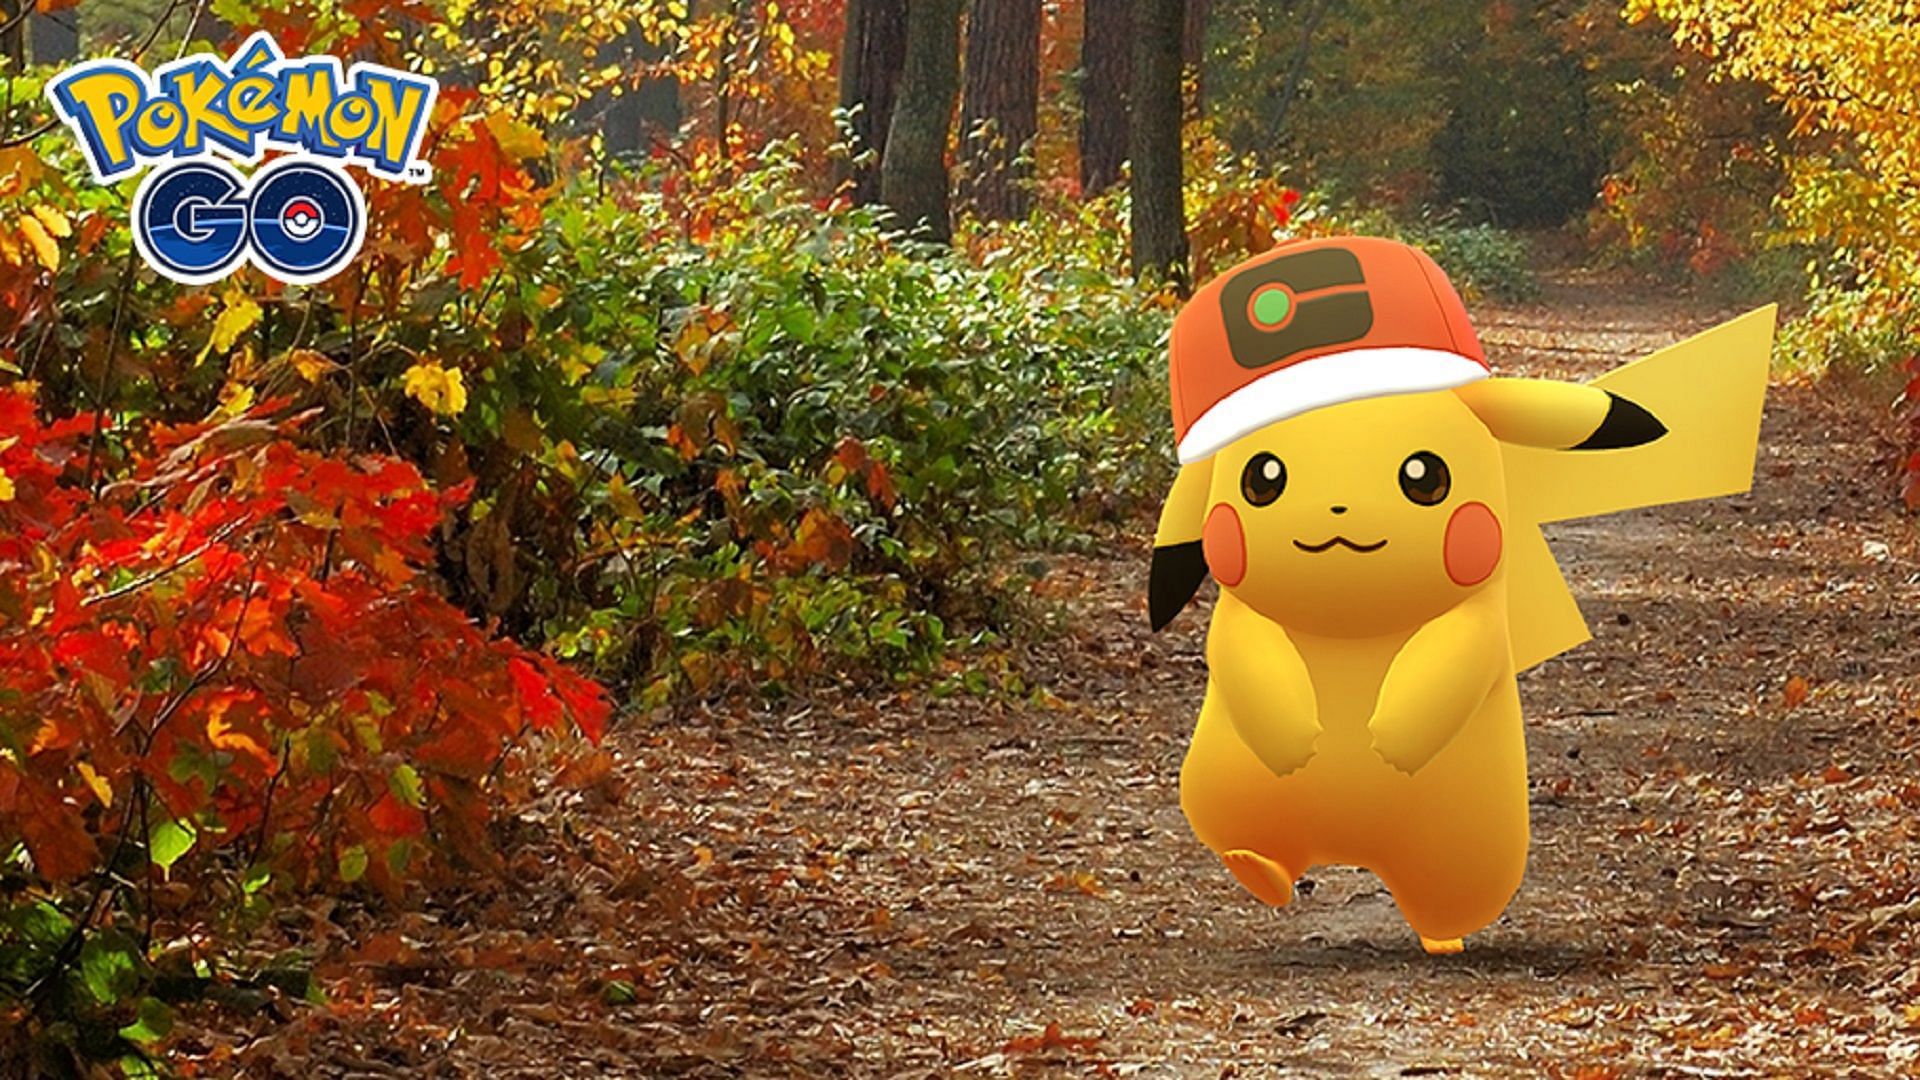 Pikachu is the most visible Electric-type Pokemon in the series, including Pokemon GO (Image via Niantic)